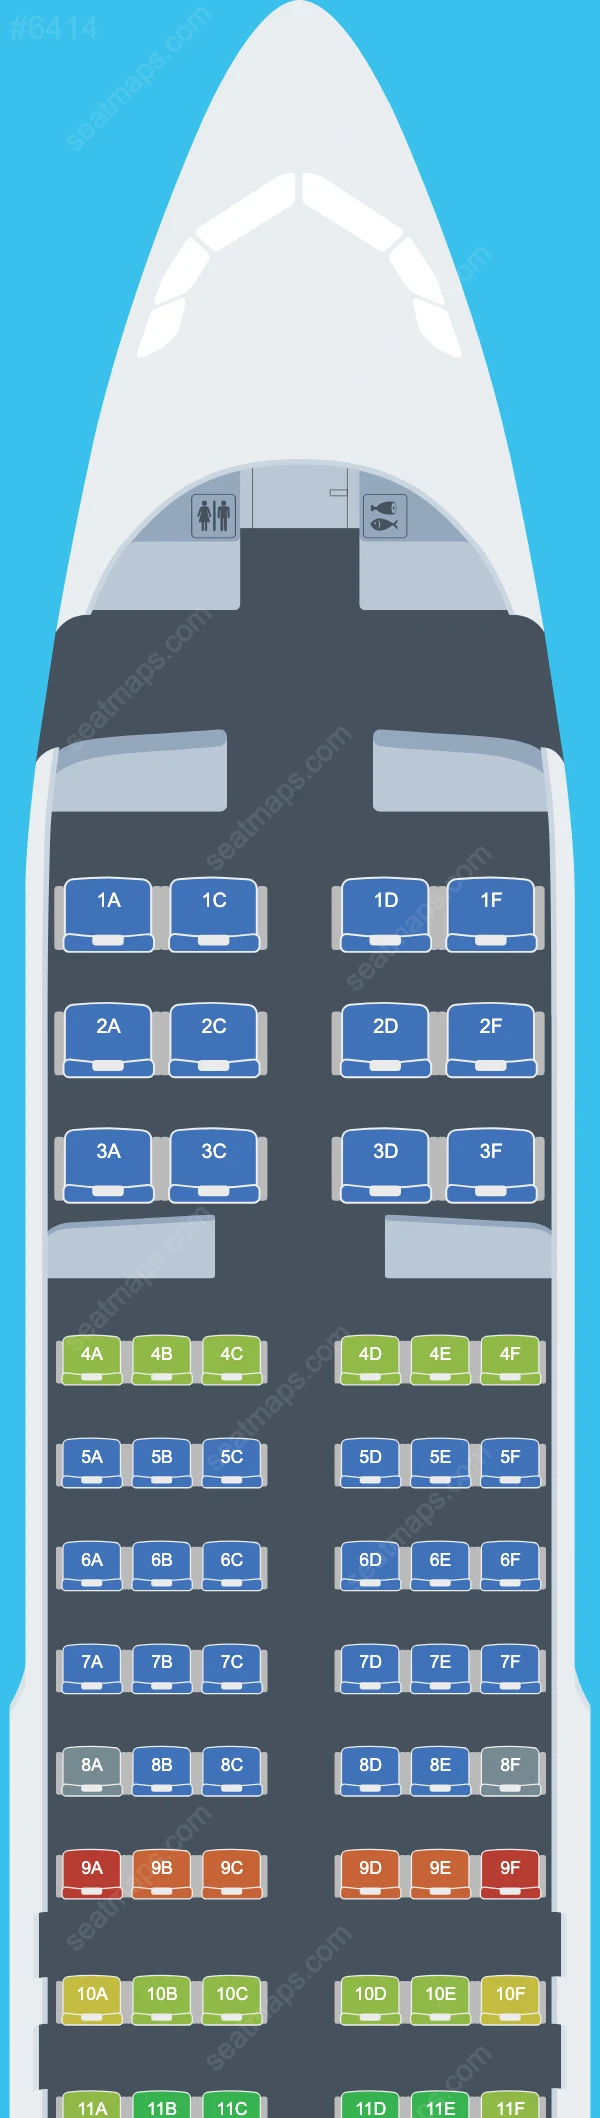 Air India Airbus A320 Seat Maps A320-200neo